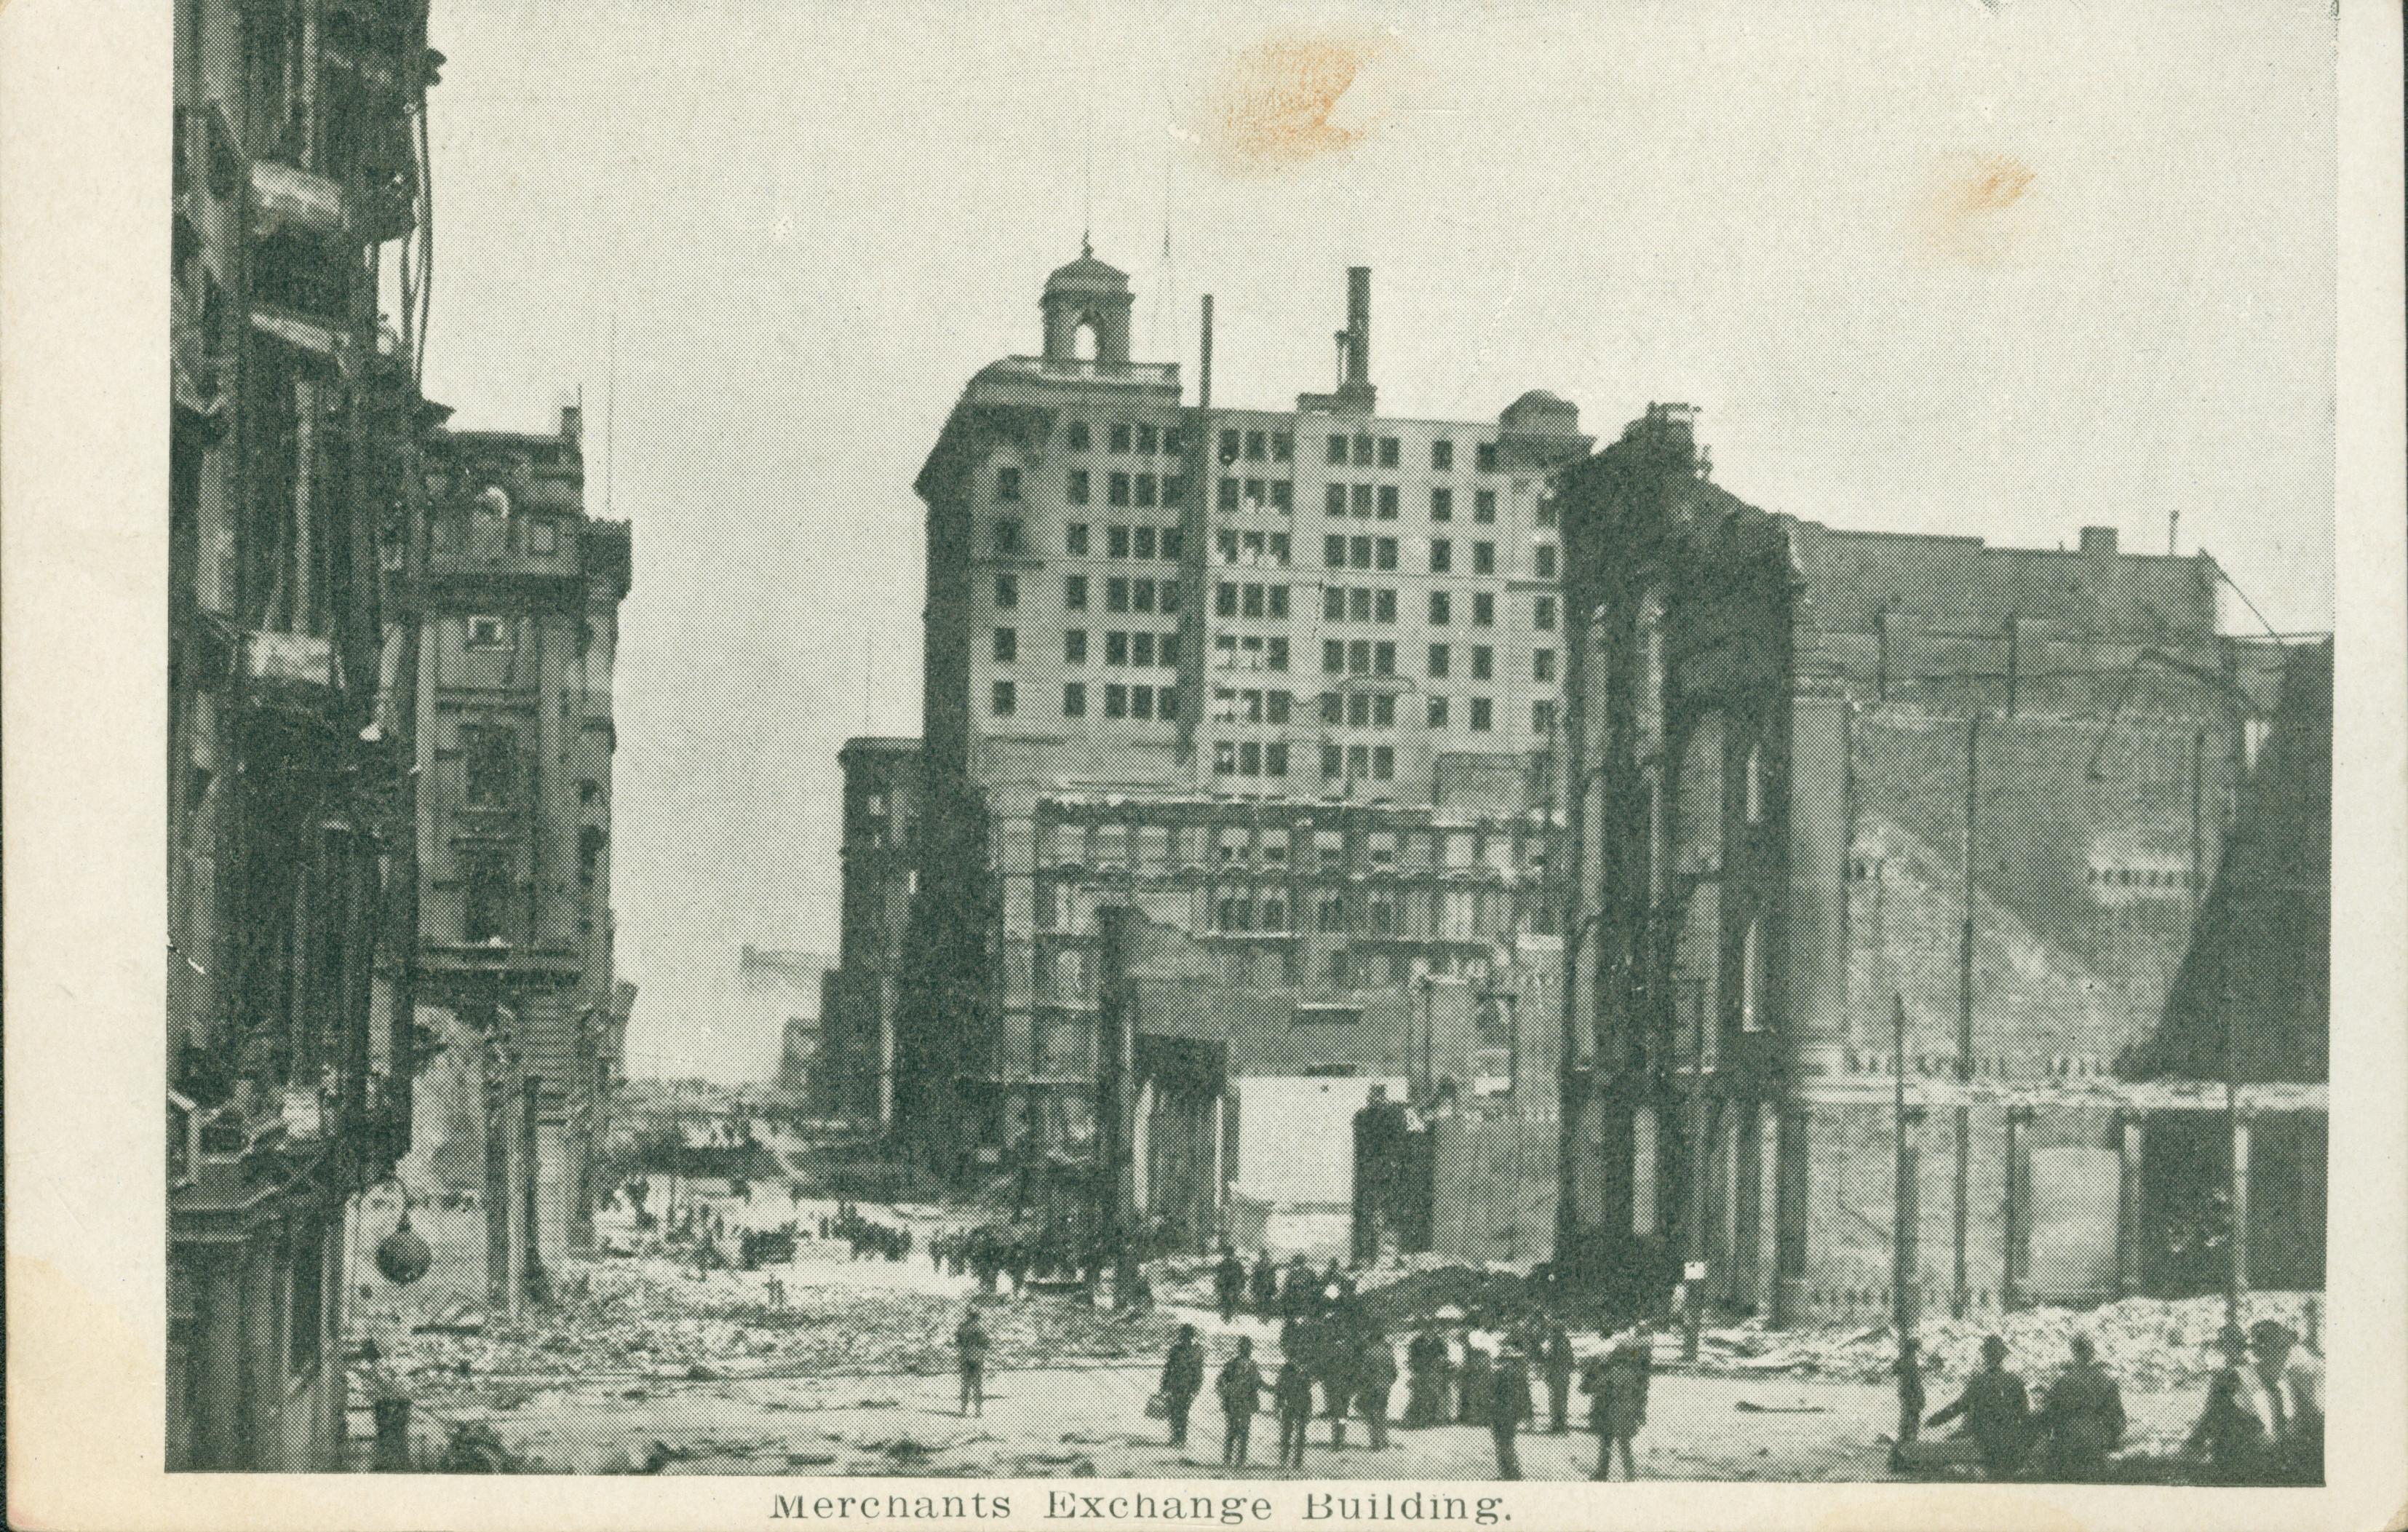 Shows the damage to the Merchants' Exchange Building in San Francisco.